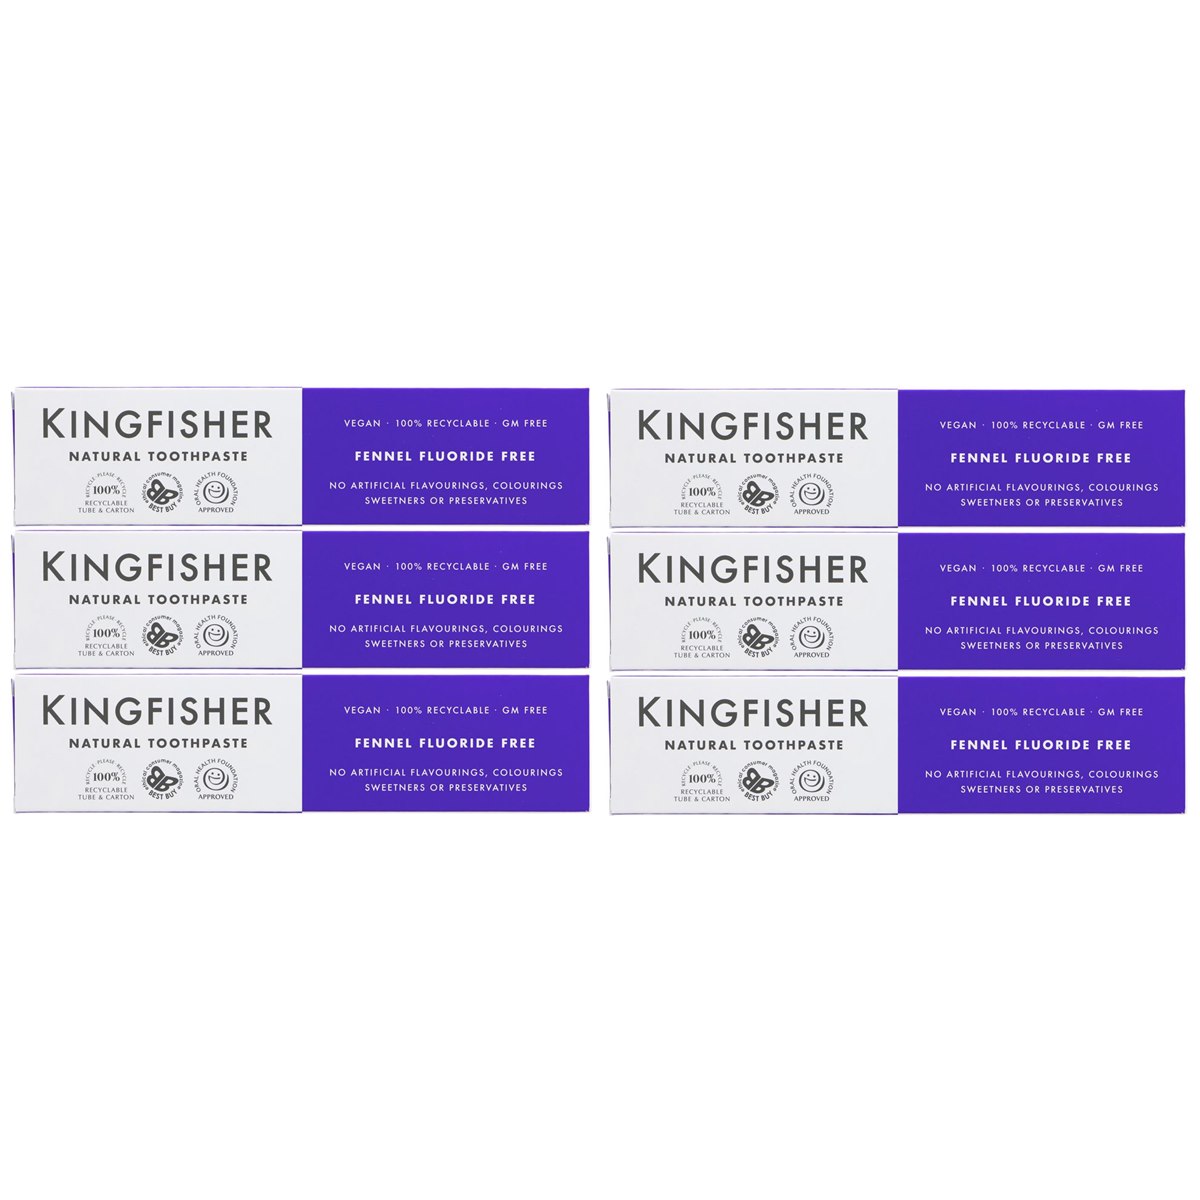 Case of 6 x Kingfisher Natural Toothpaste Fennel Fluoride Free 100ml